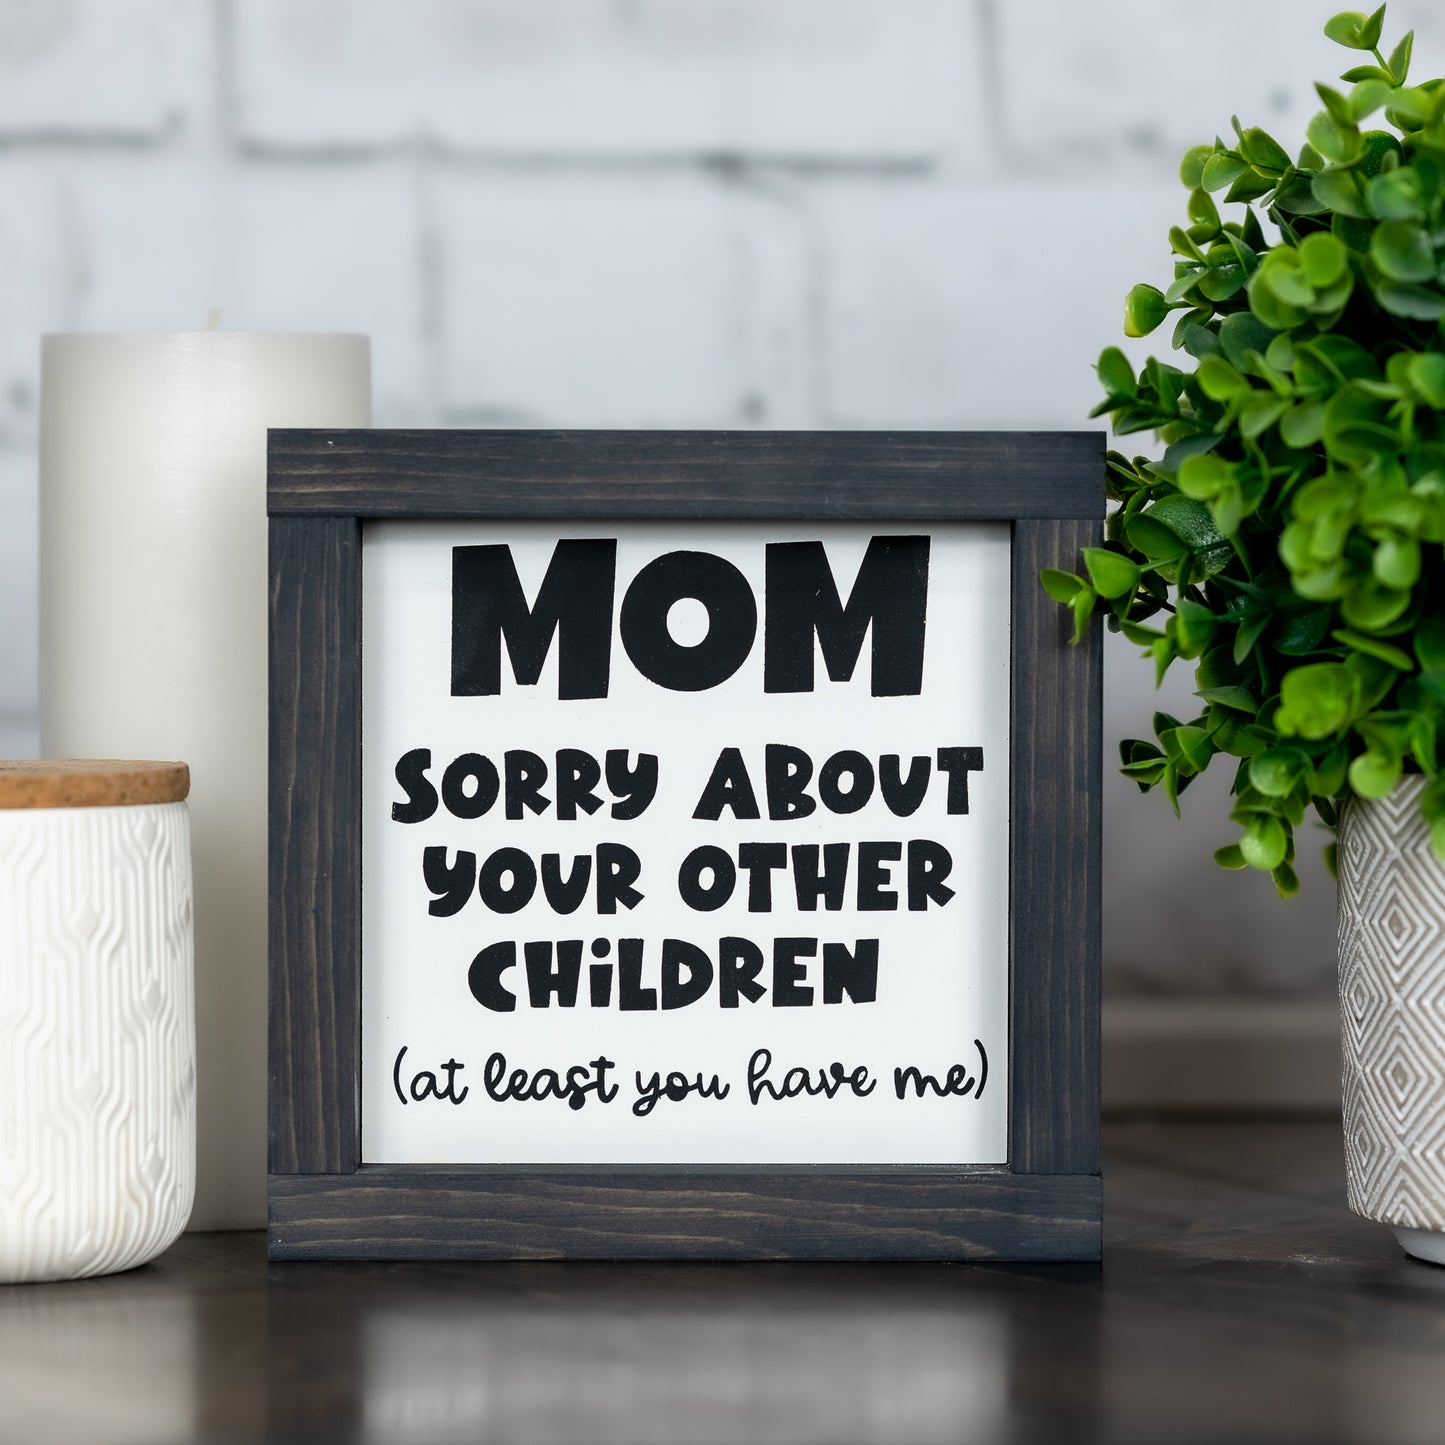 mom sorry about your other children at least you had me - mini sign